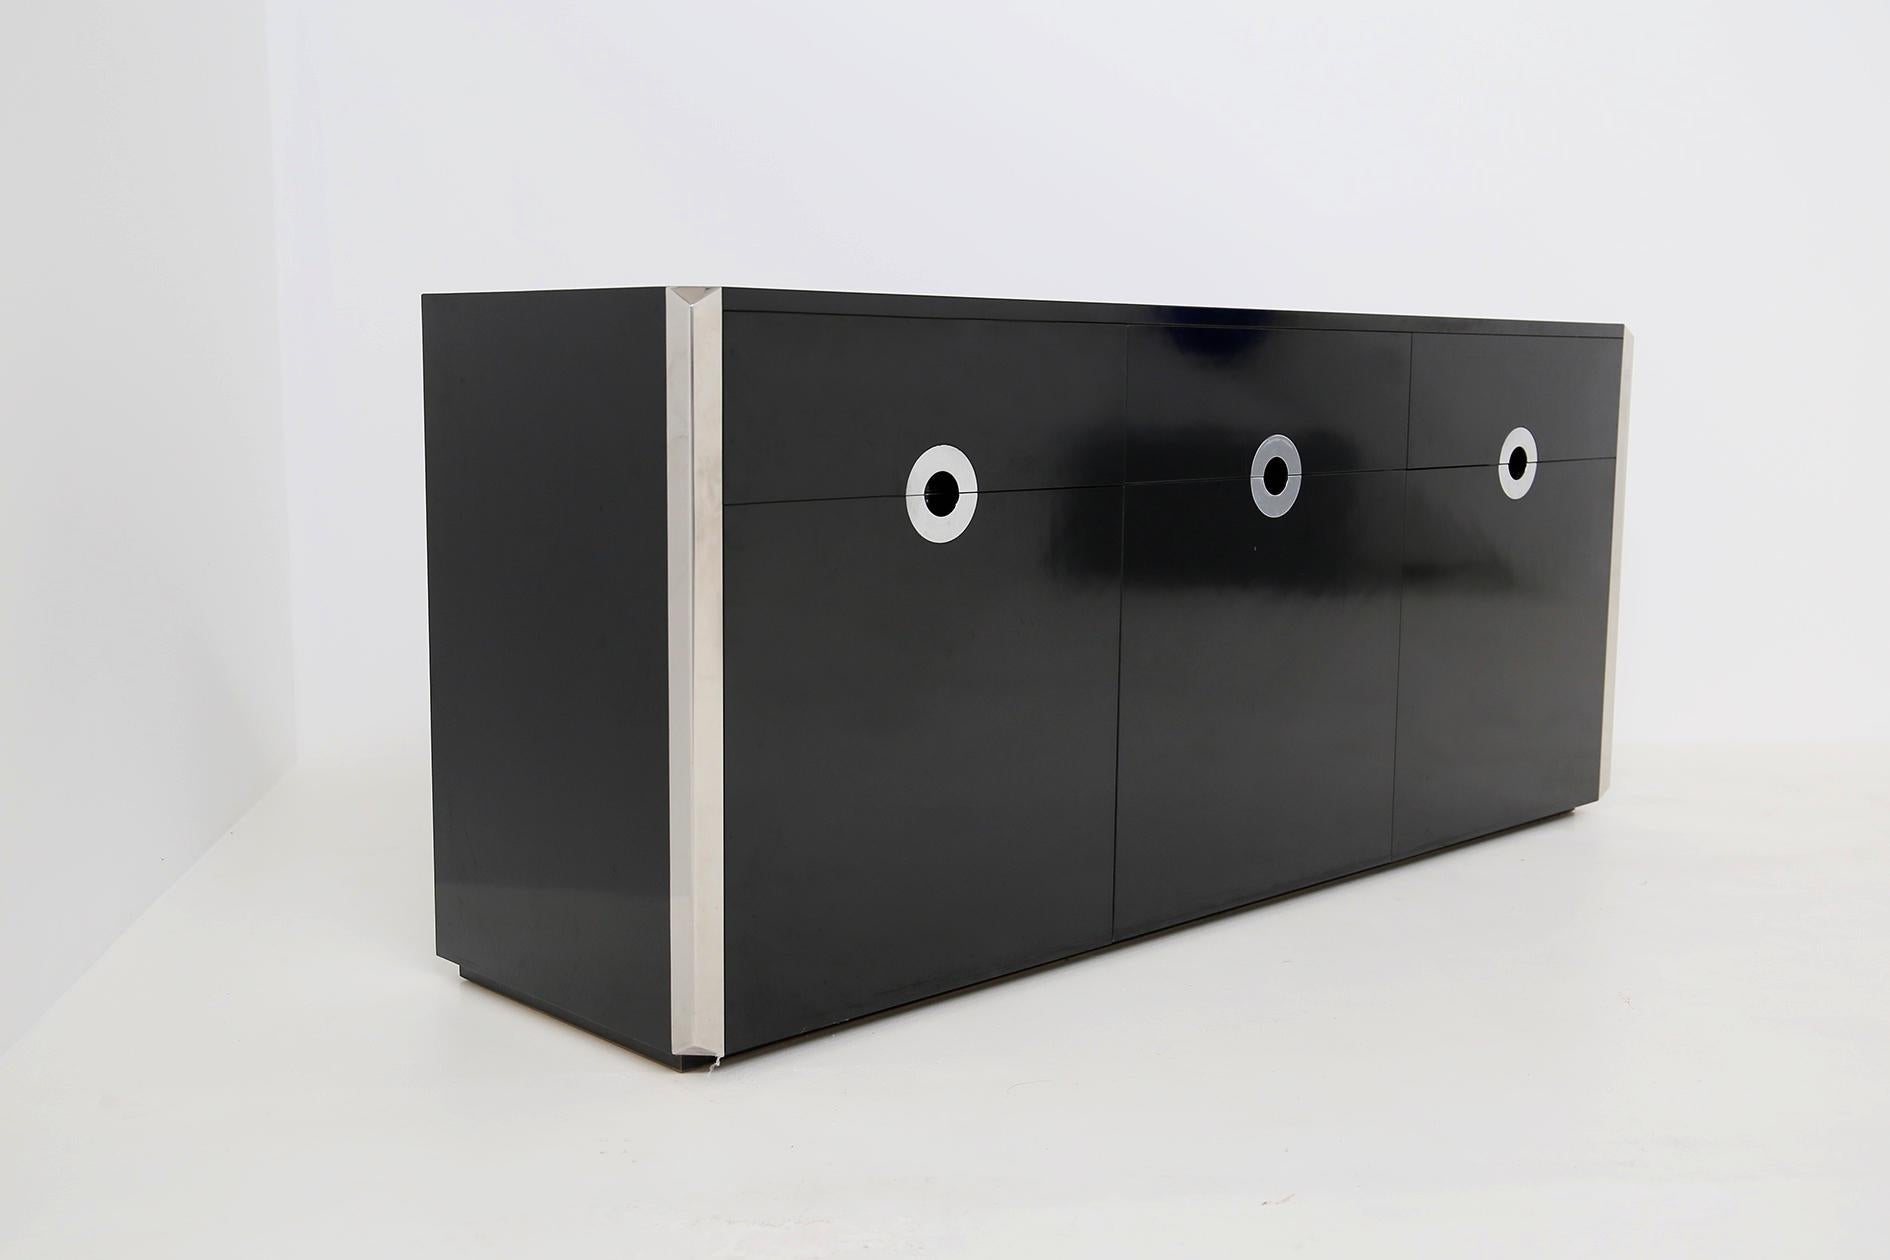 Elegant and sturdy sideboard designed by Willy Rizzo in 1970s. 
The sideboard was made for Mario Sabot. The sideboard has a sturdy structure in black lacquered wood. The peculiarity of the sideboard is its triangular steel profiles. Another